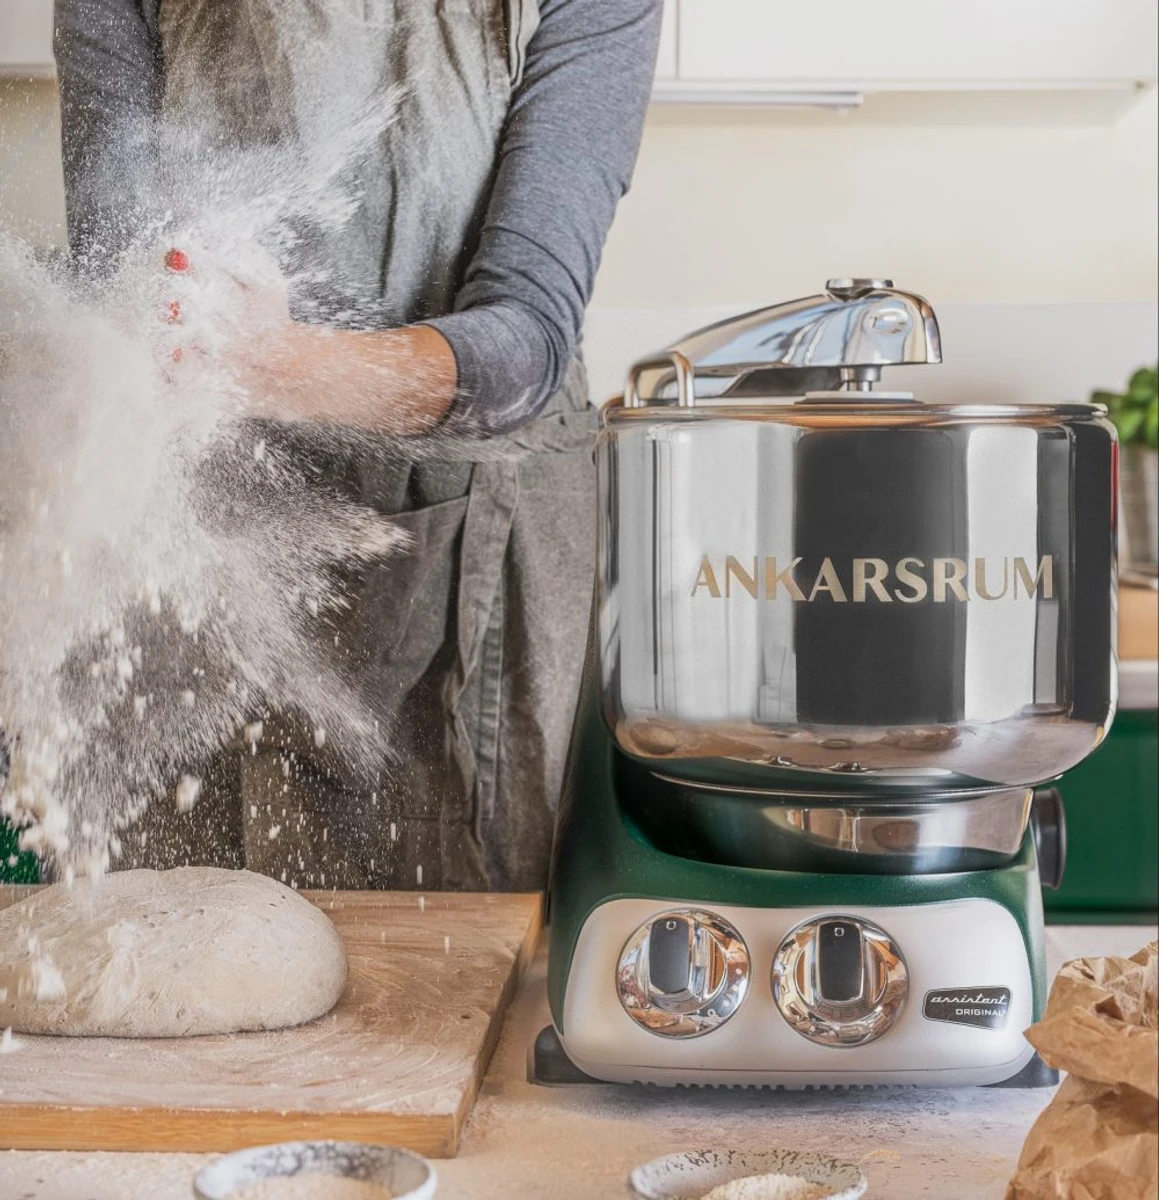 Ankarsrum Assistent Review in One Word: Brilliant! - Christina's Cucina